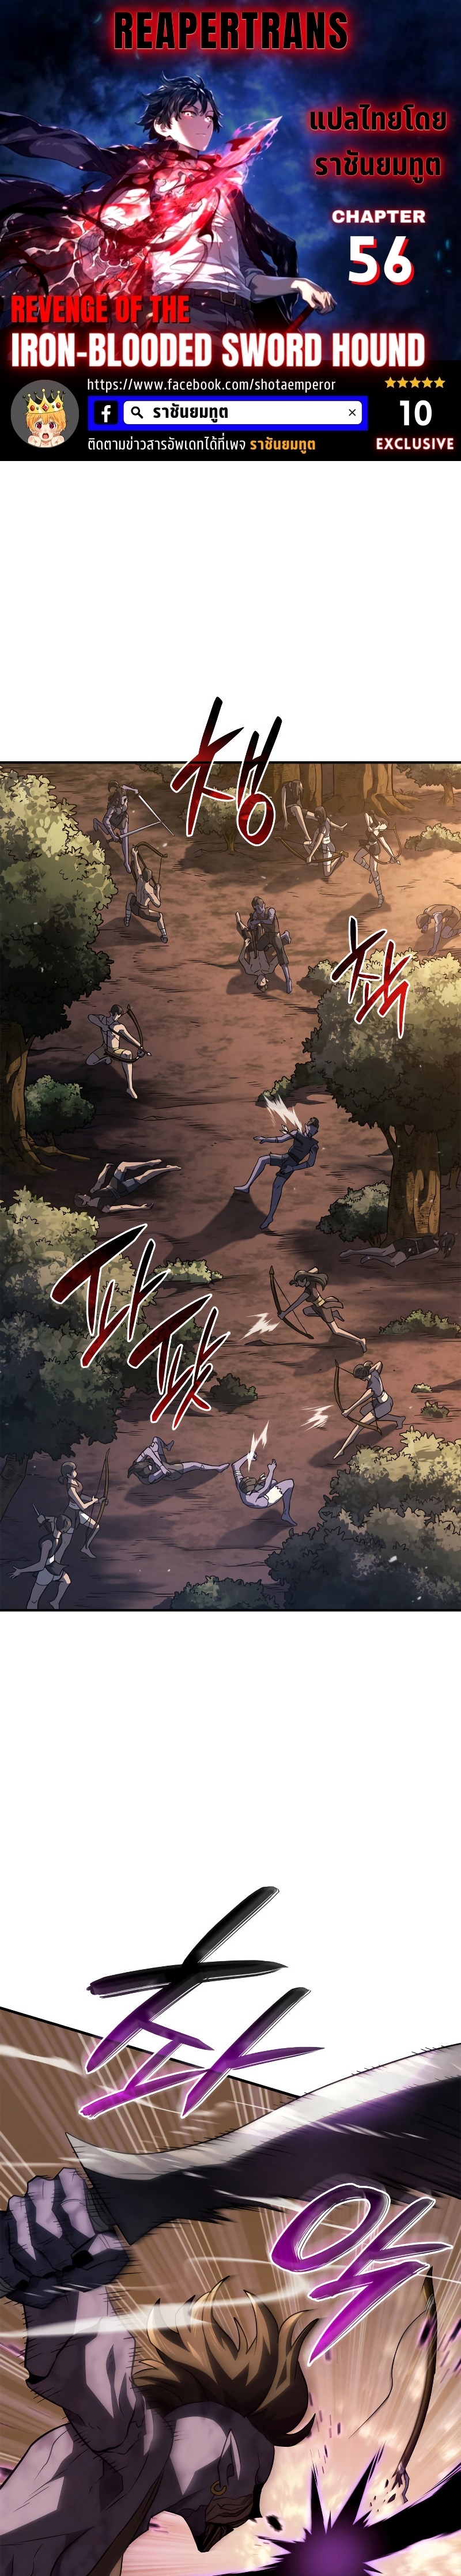 revenge of the iron blooded sword hound 56.01